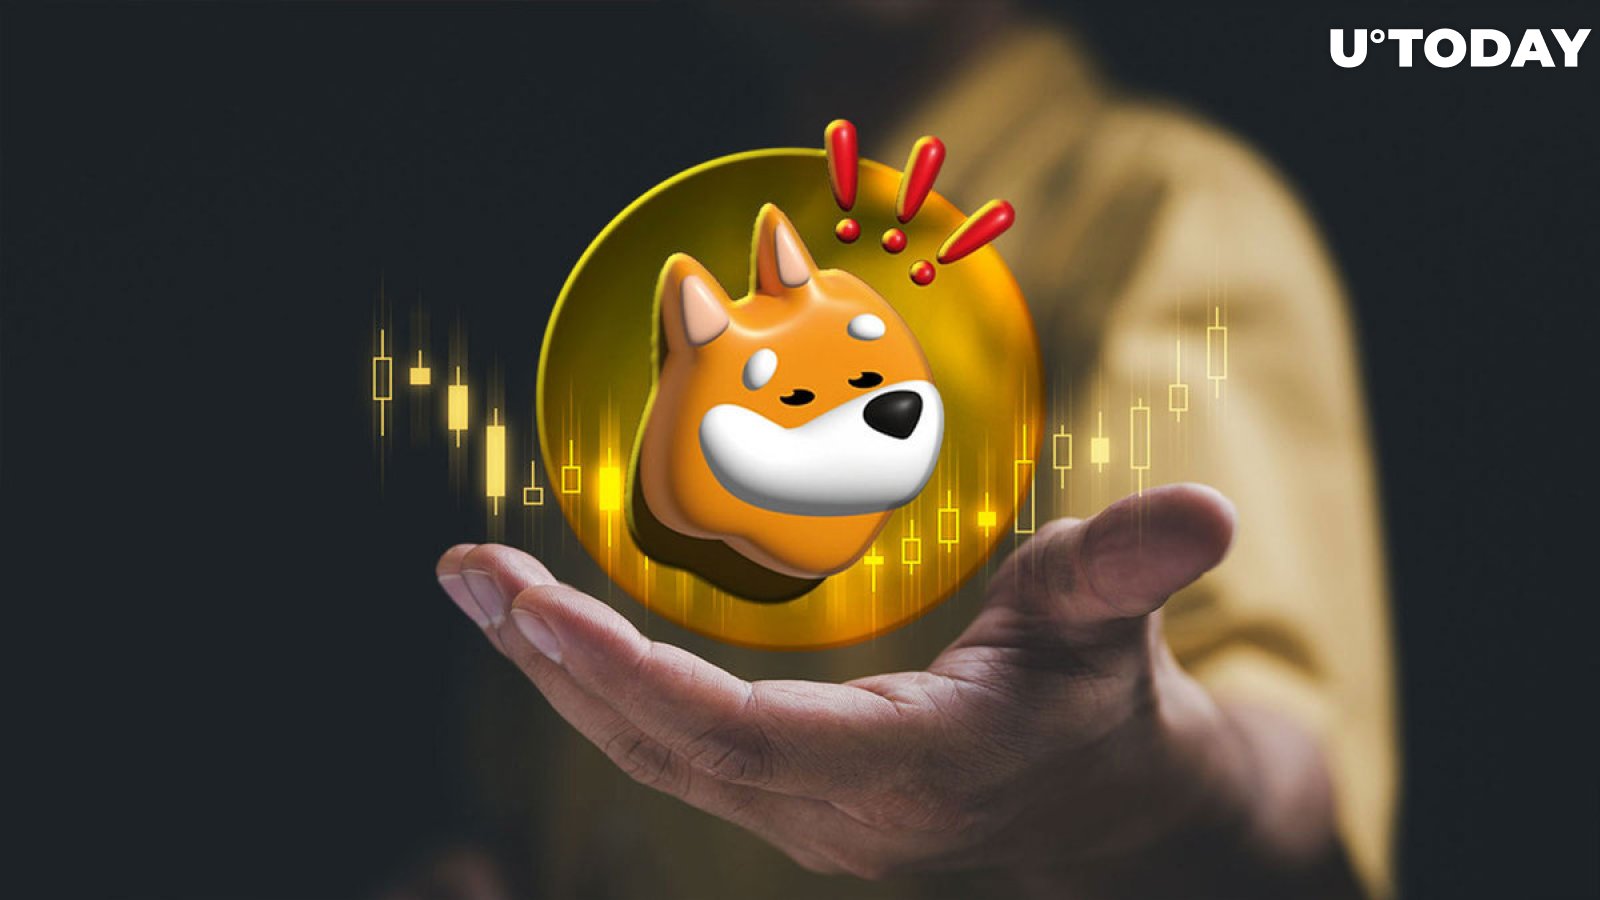 Meme Coin Bonk Jumps 17% as It Seeks Revival With This Partnership: Details